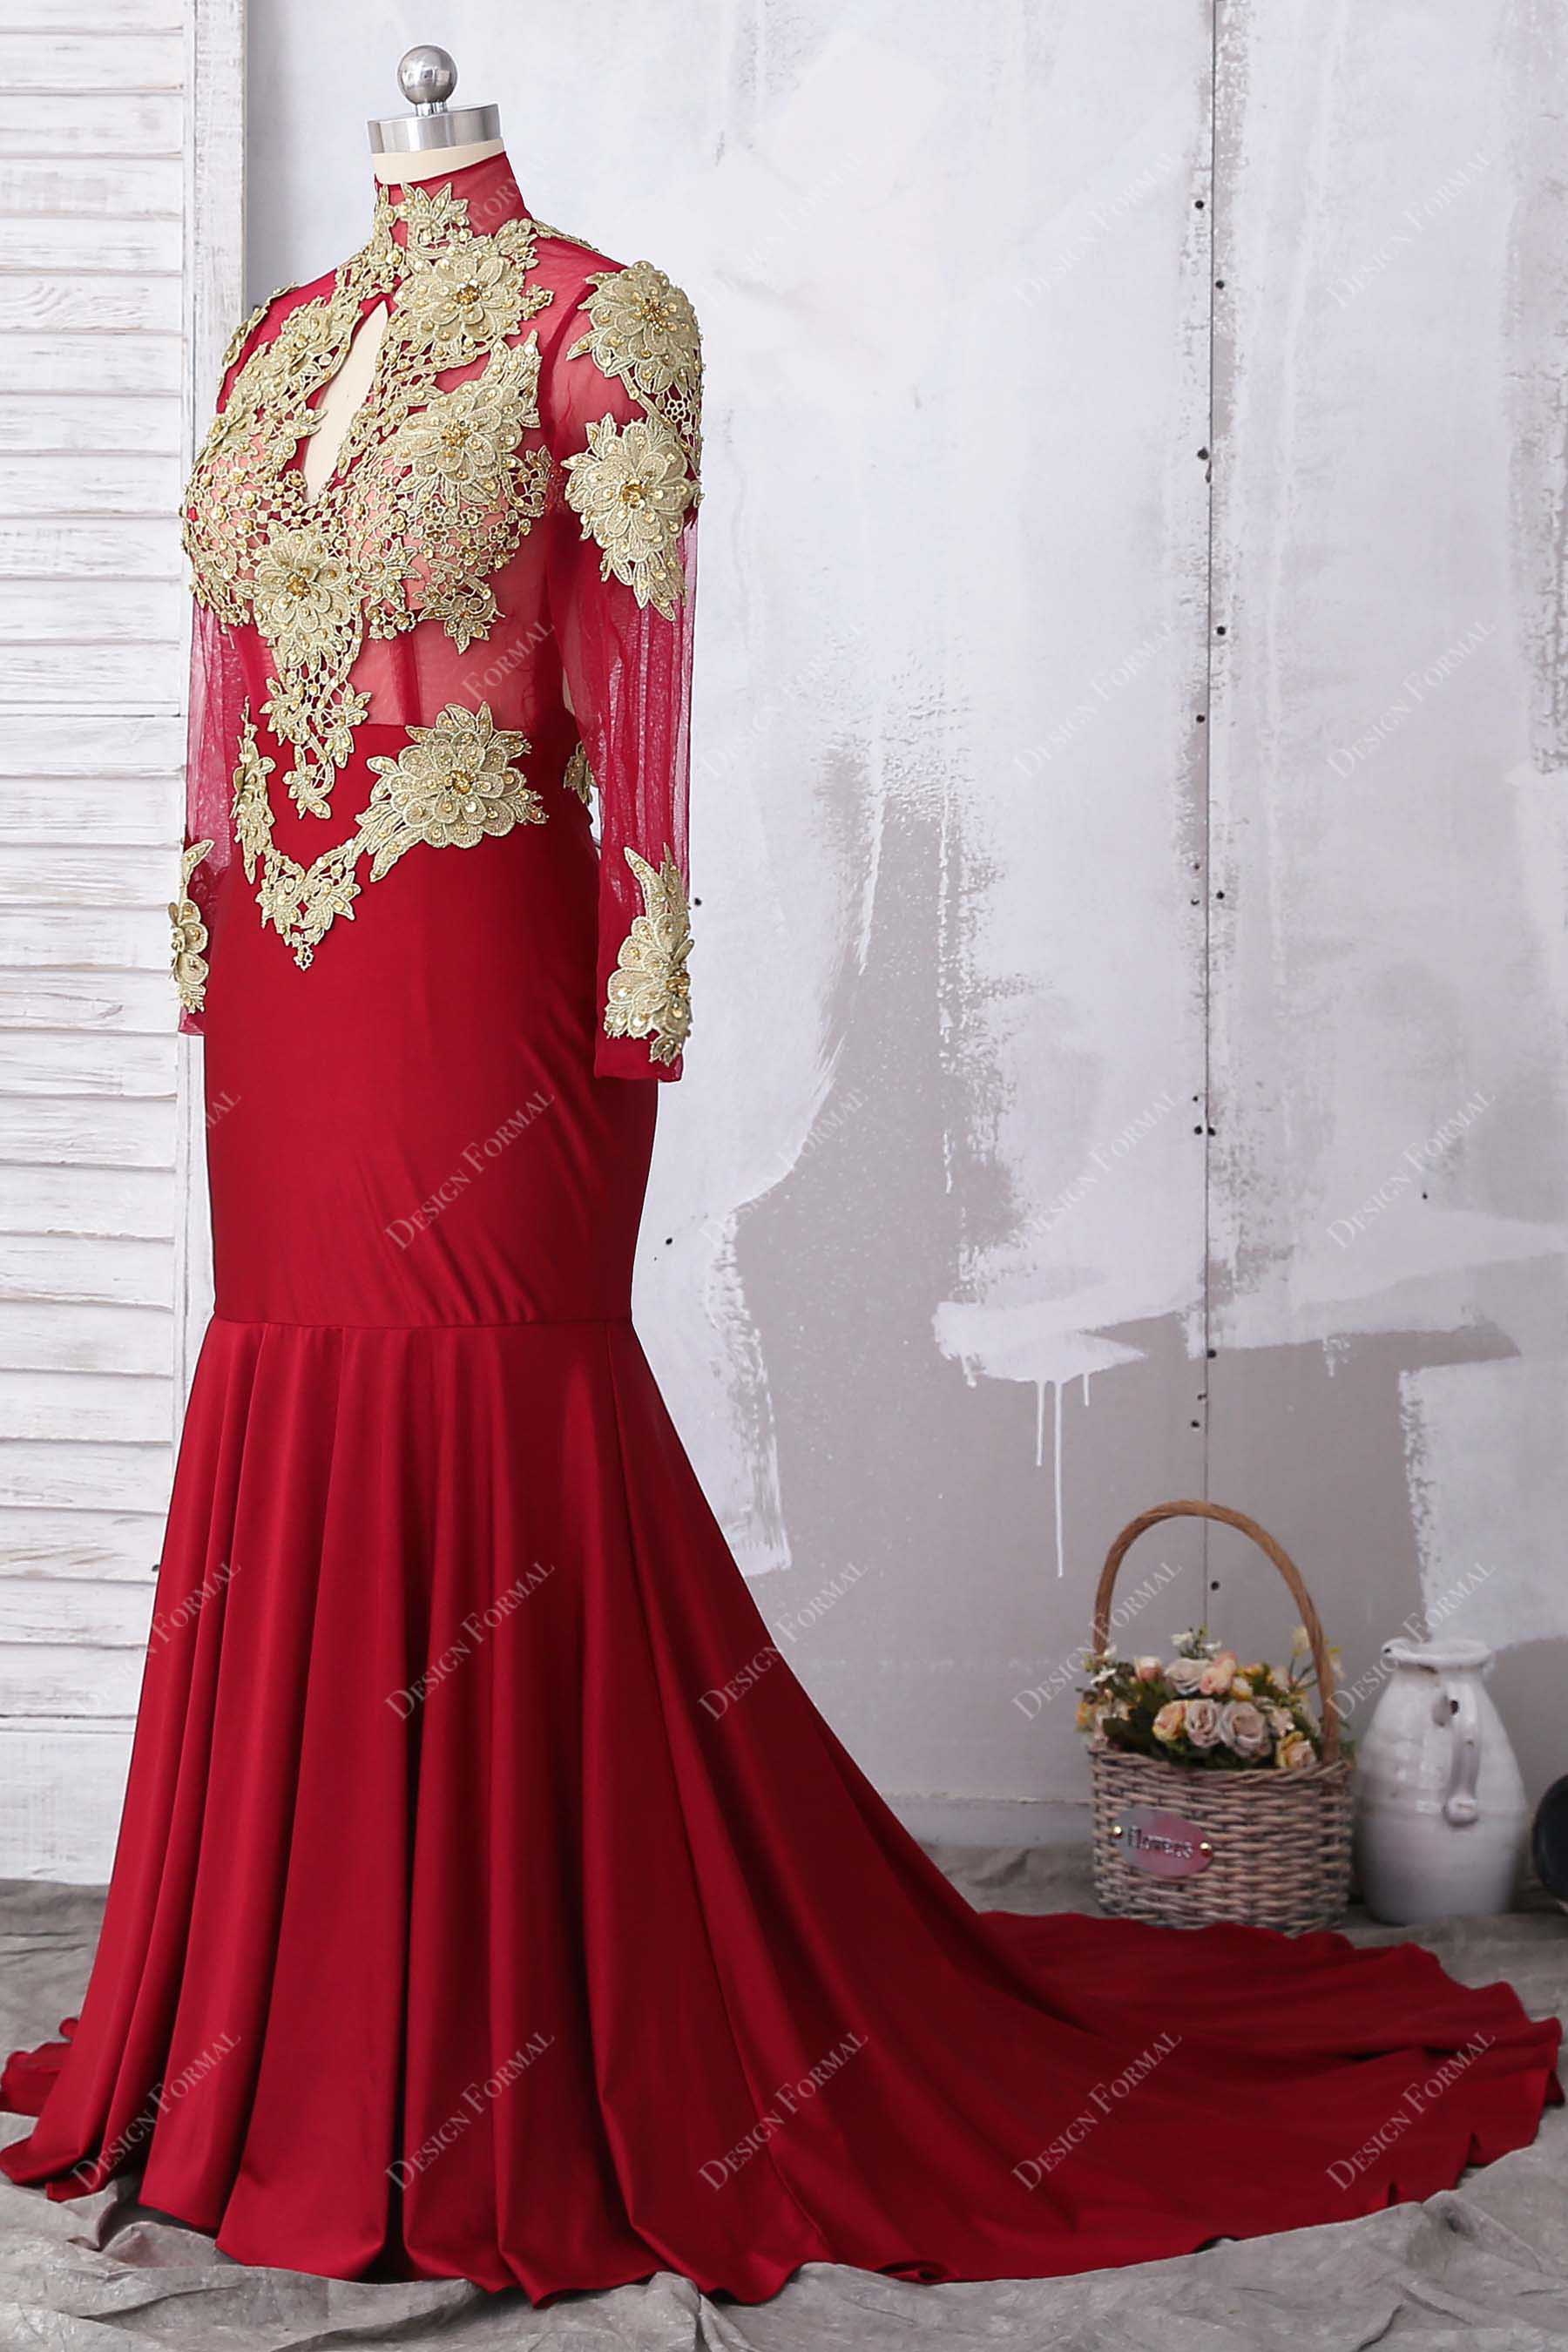 sheer long sleeved keyhole high neck prom gown